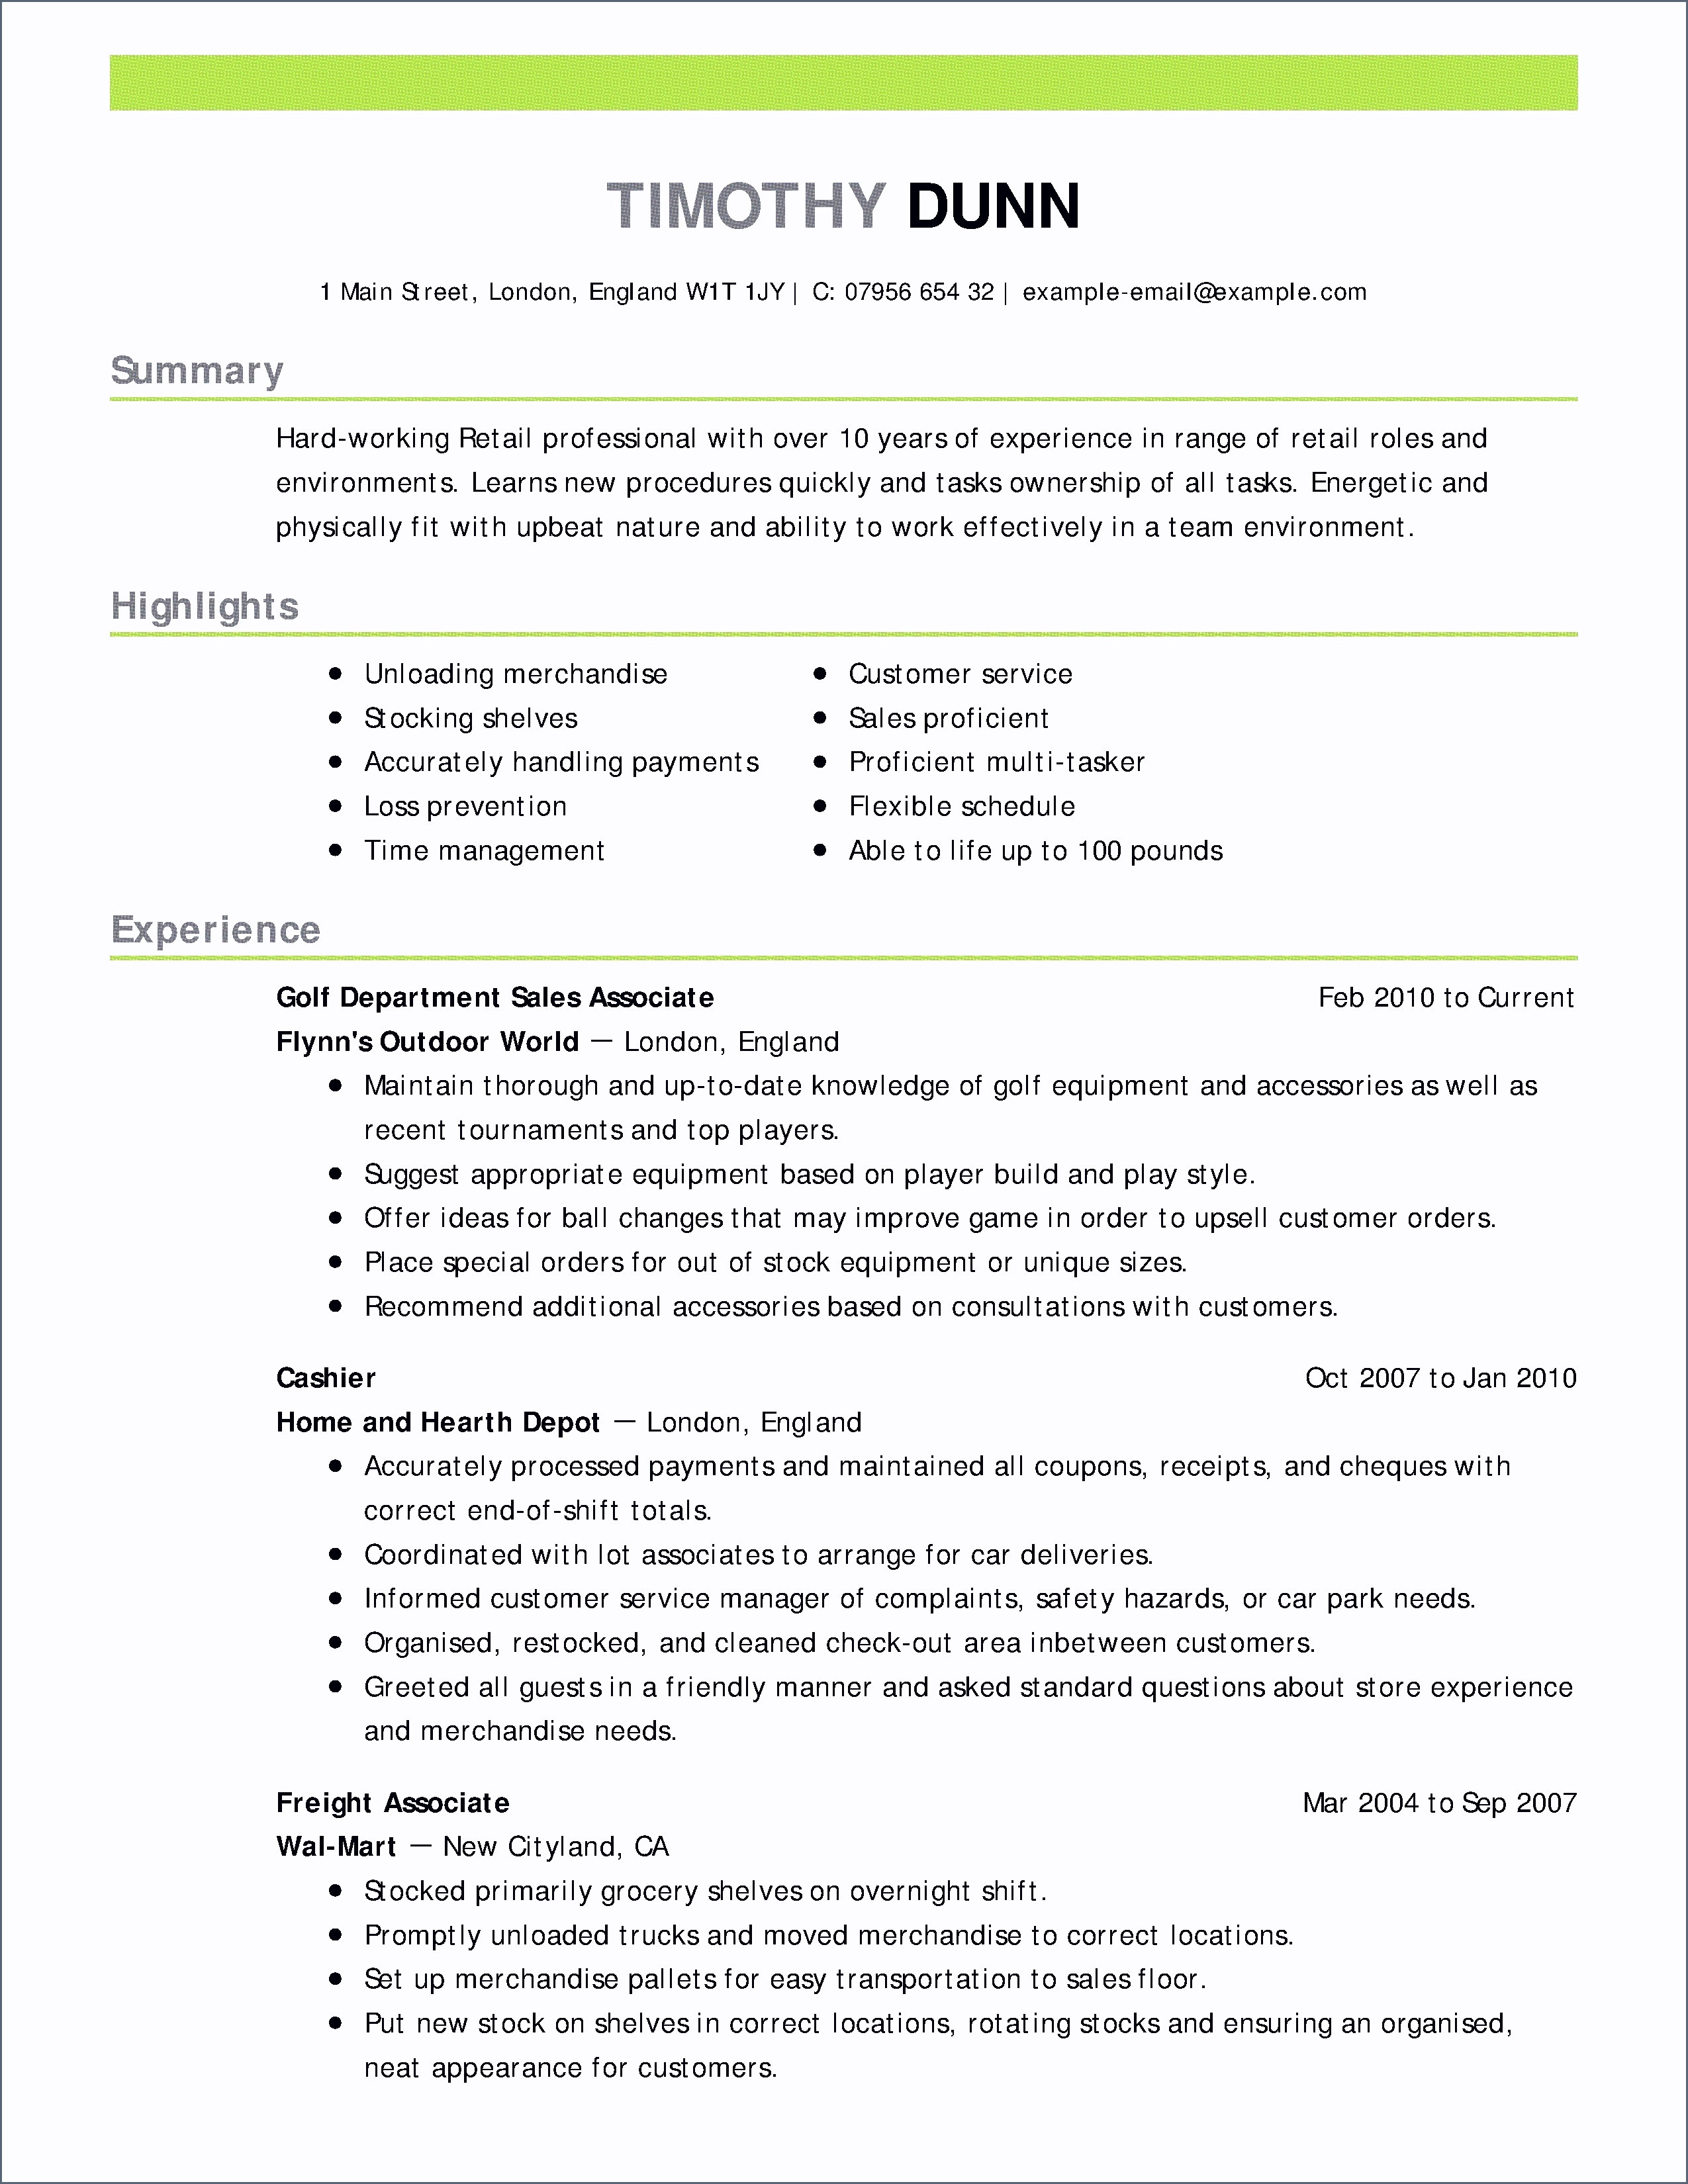 Resume Objective Examples  Good Resume Objective Examples Elegant Good Resume Objective Luxury